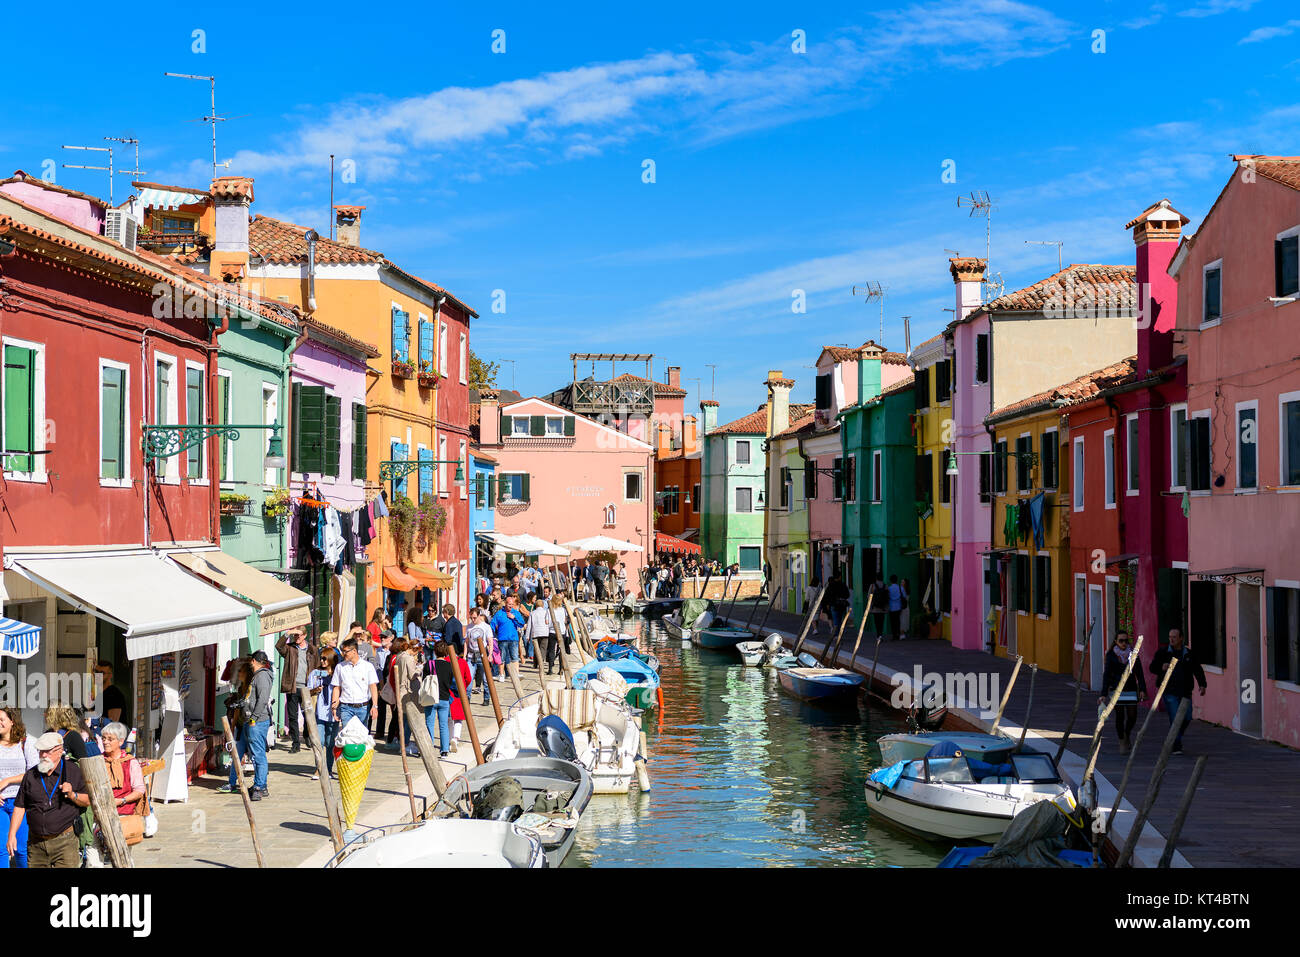 Tourists and colorful houses along the canal on the Venetian island of Burano, Venice lagoon, Italy Stock Photo